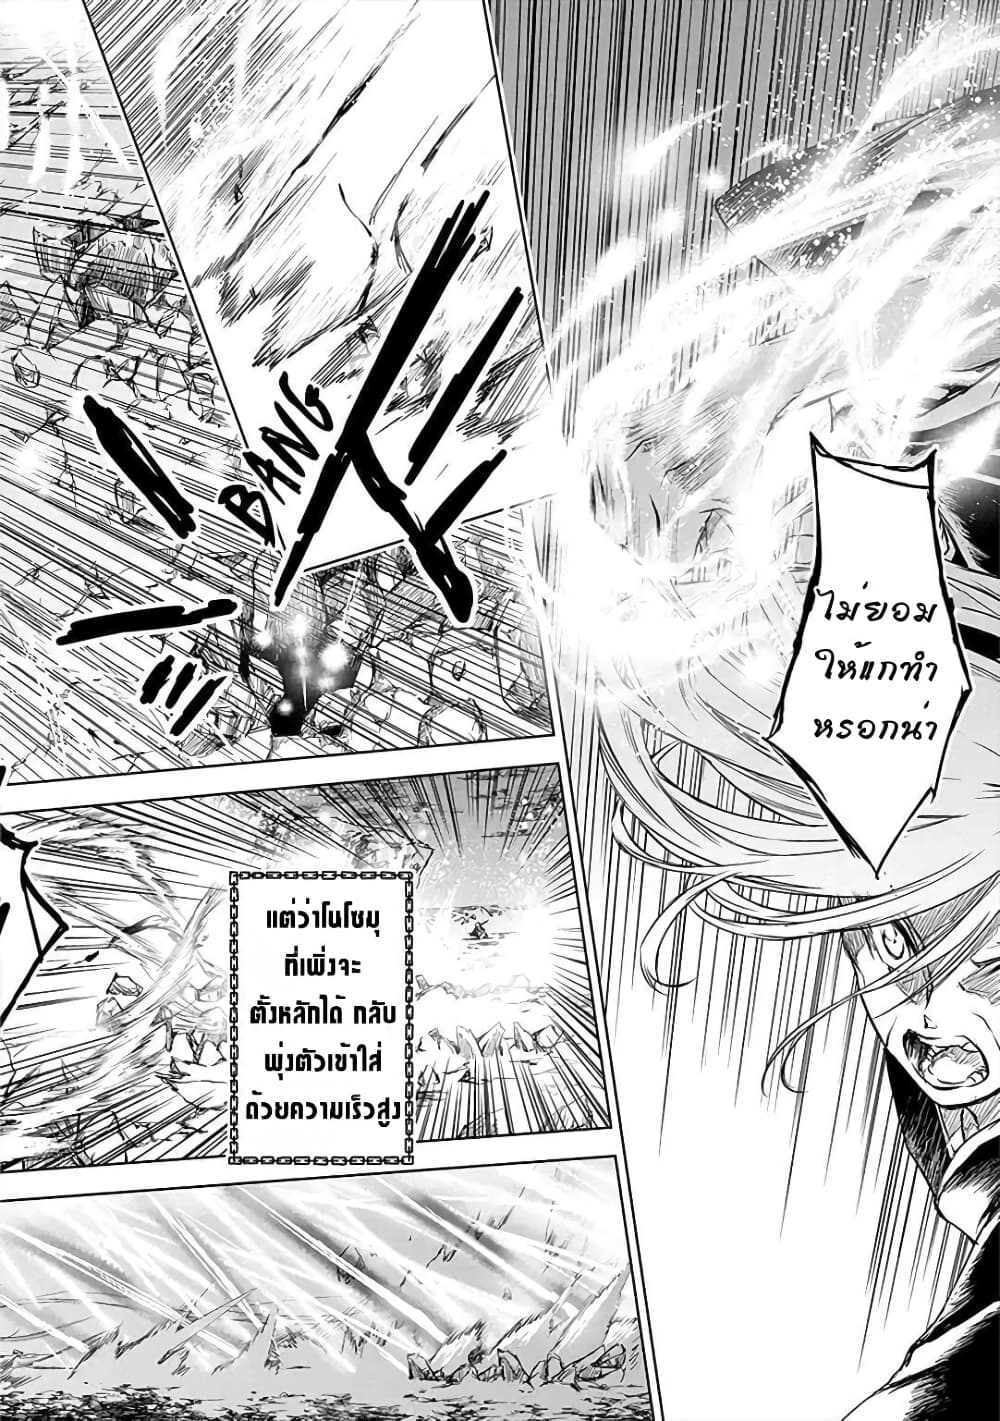 Ori of the Dragon Chain Heart in the Mind 8 (9)